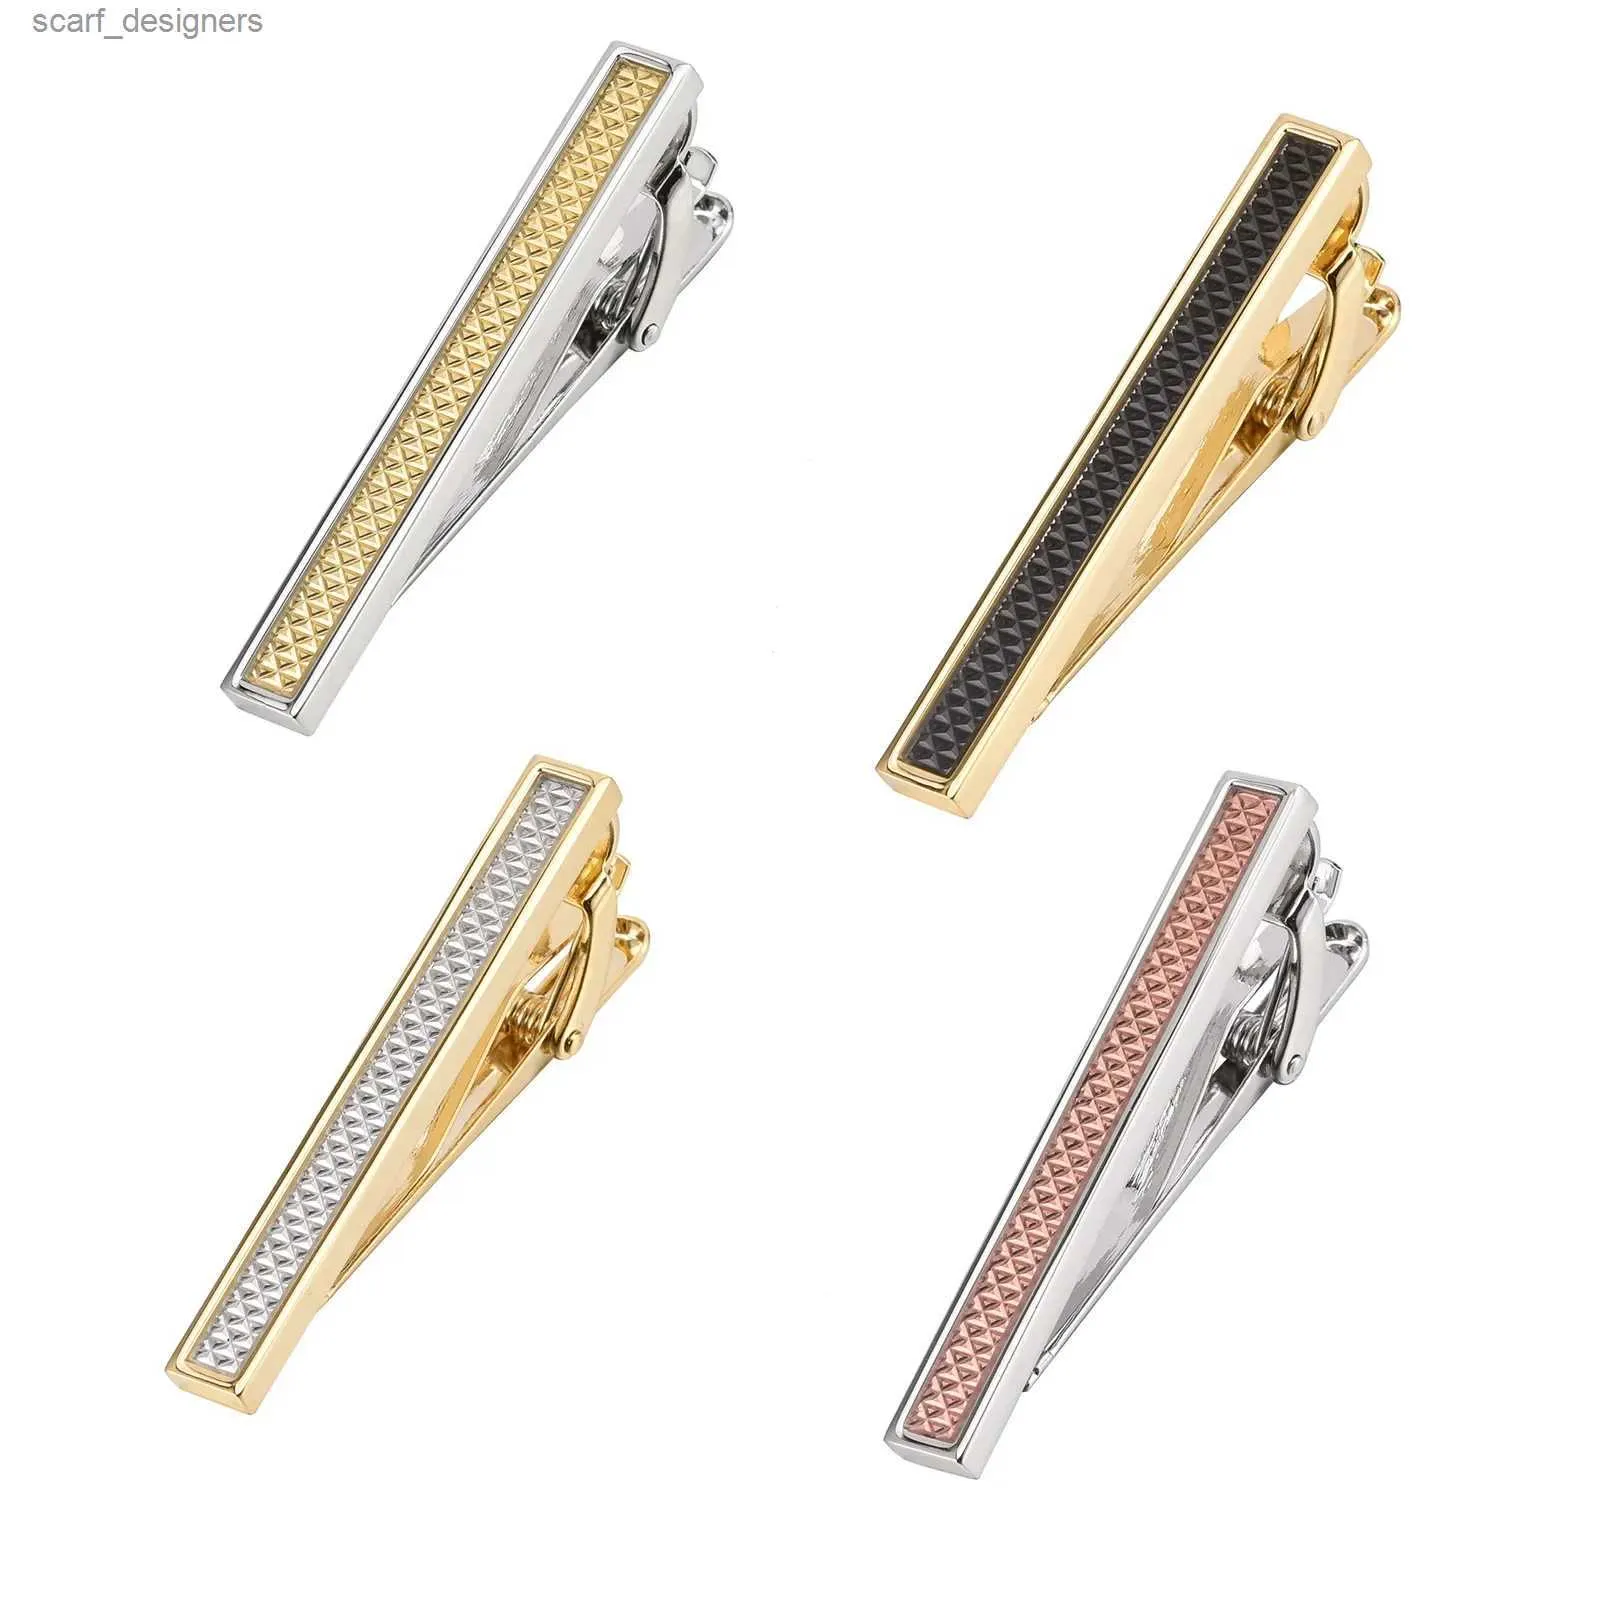 Tie Clips Mens Tie-Clips Fashion Jewelry Casual Simple Ol Style Business Banket Party Wedding Suit Shirt Skjorta Tie Accessories Gifts For Men Y240411